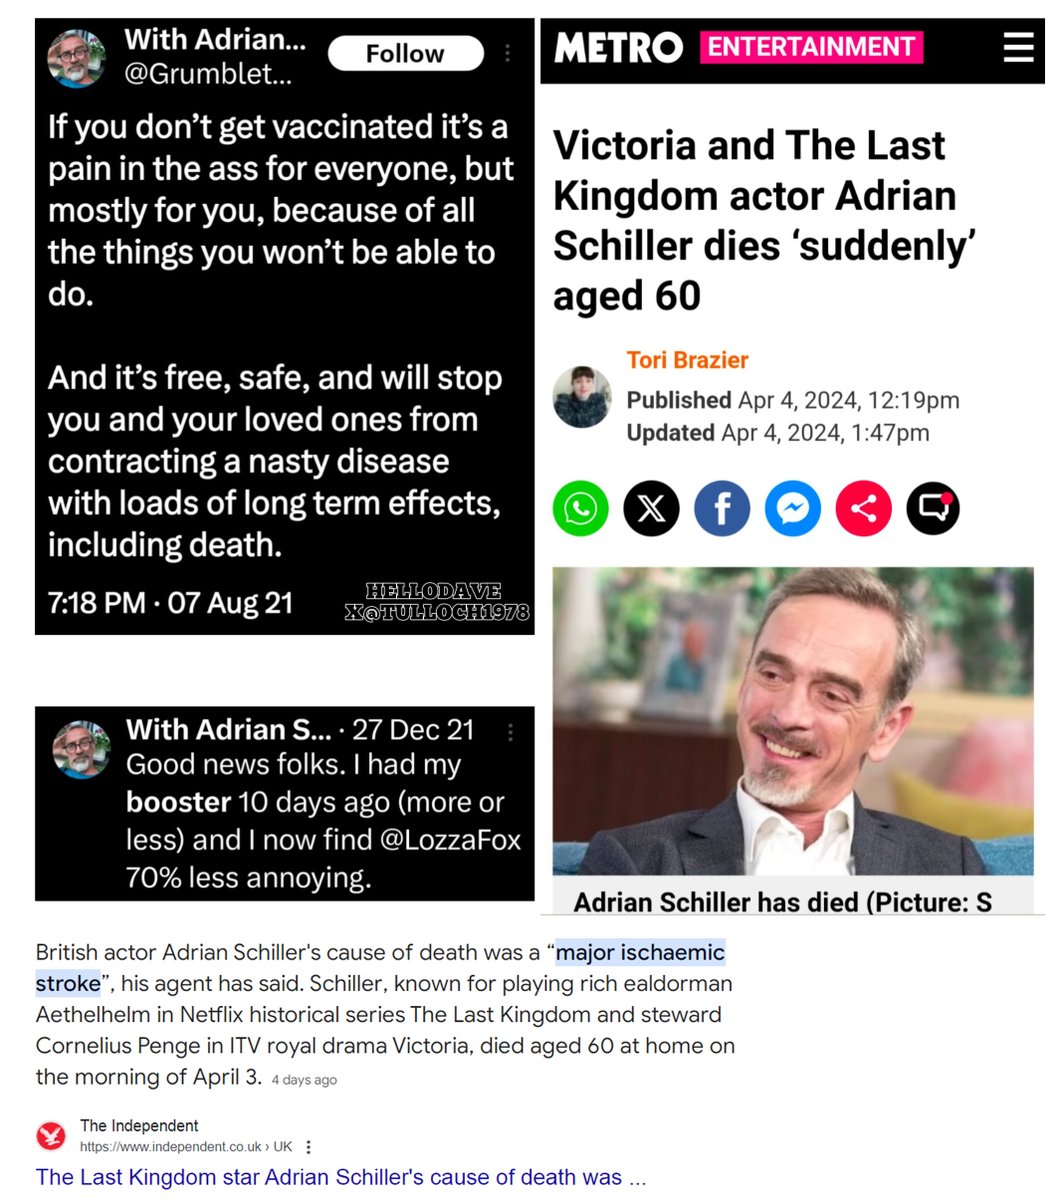 British Actor, 60 year old Adrian Schiller died suddenly from an ischemic stroke in his home on April 3, 2024.

Aug.2021: 'If you don't get vaccinated it's a pain in the ass for everyone, but mostly for you, because of all the things you won't be able to do'

'And it's free,…